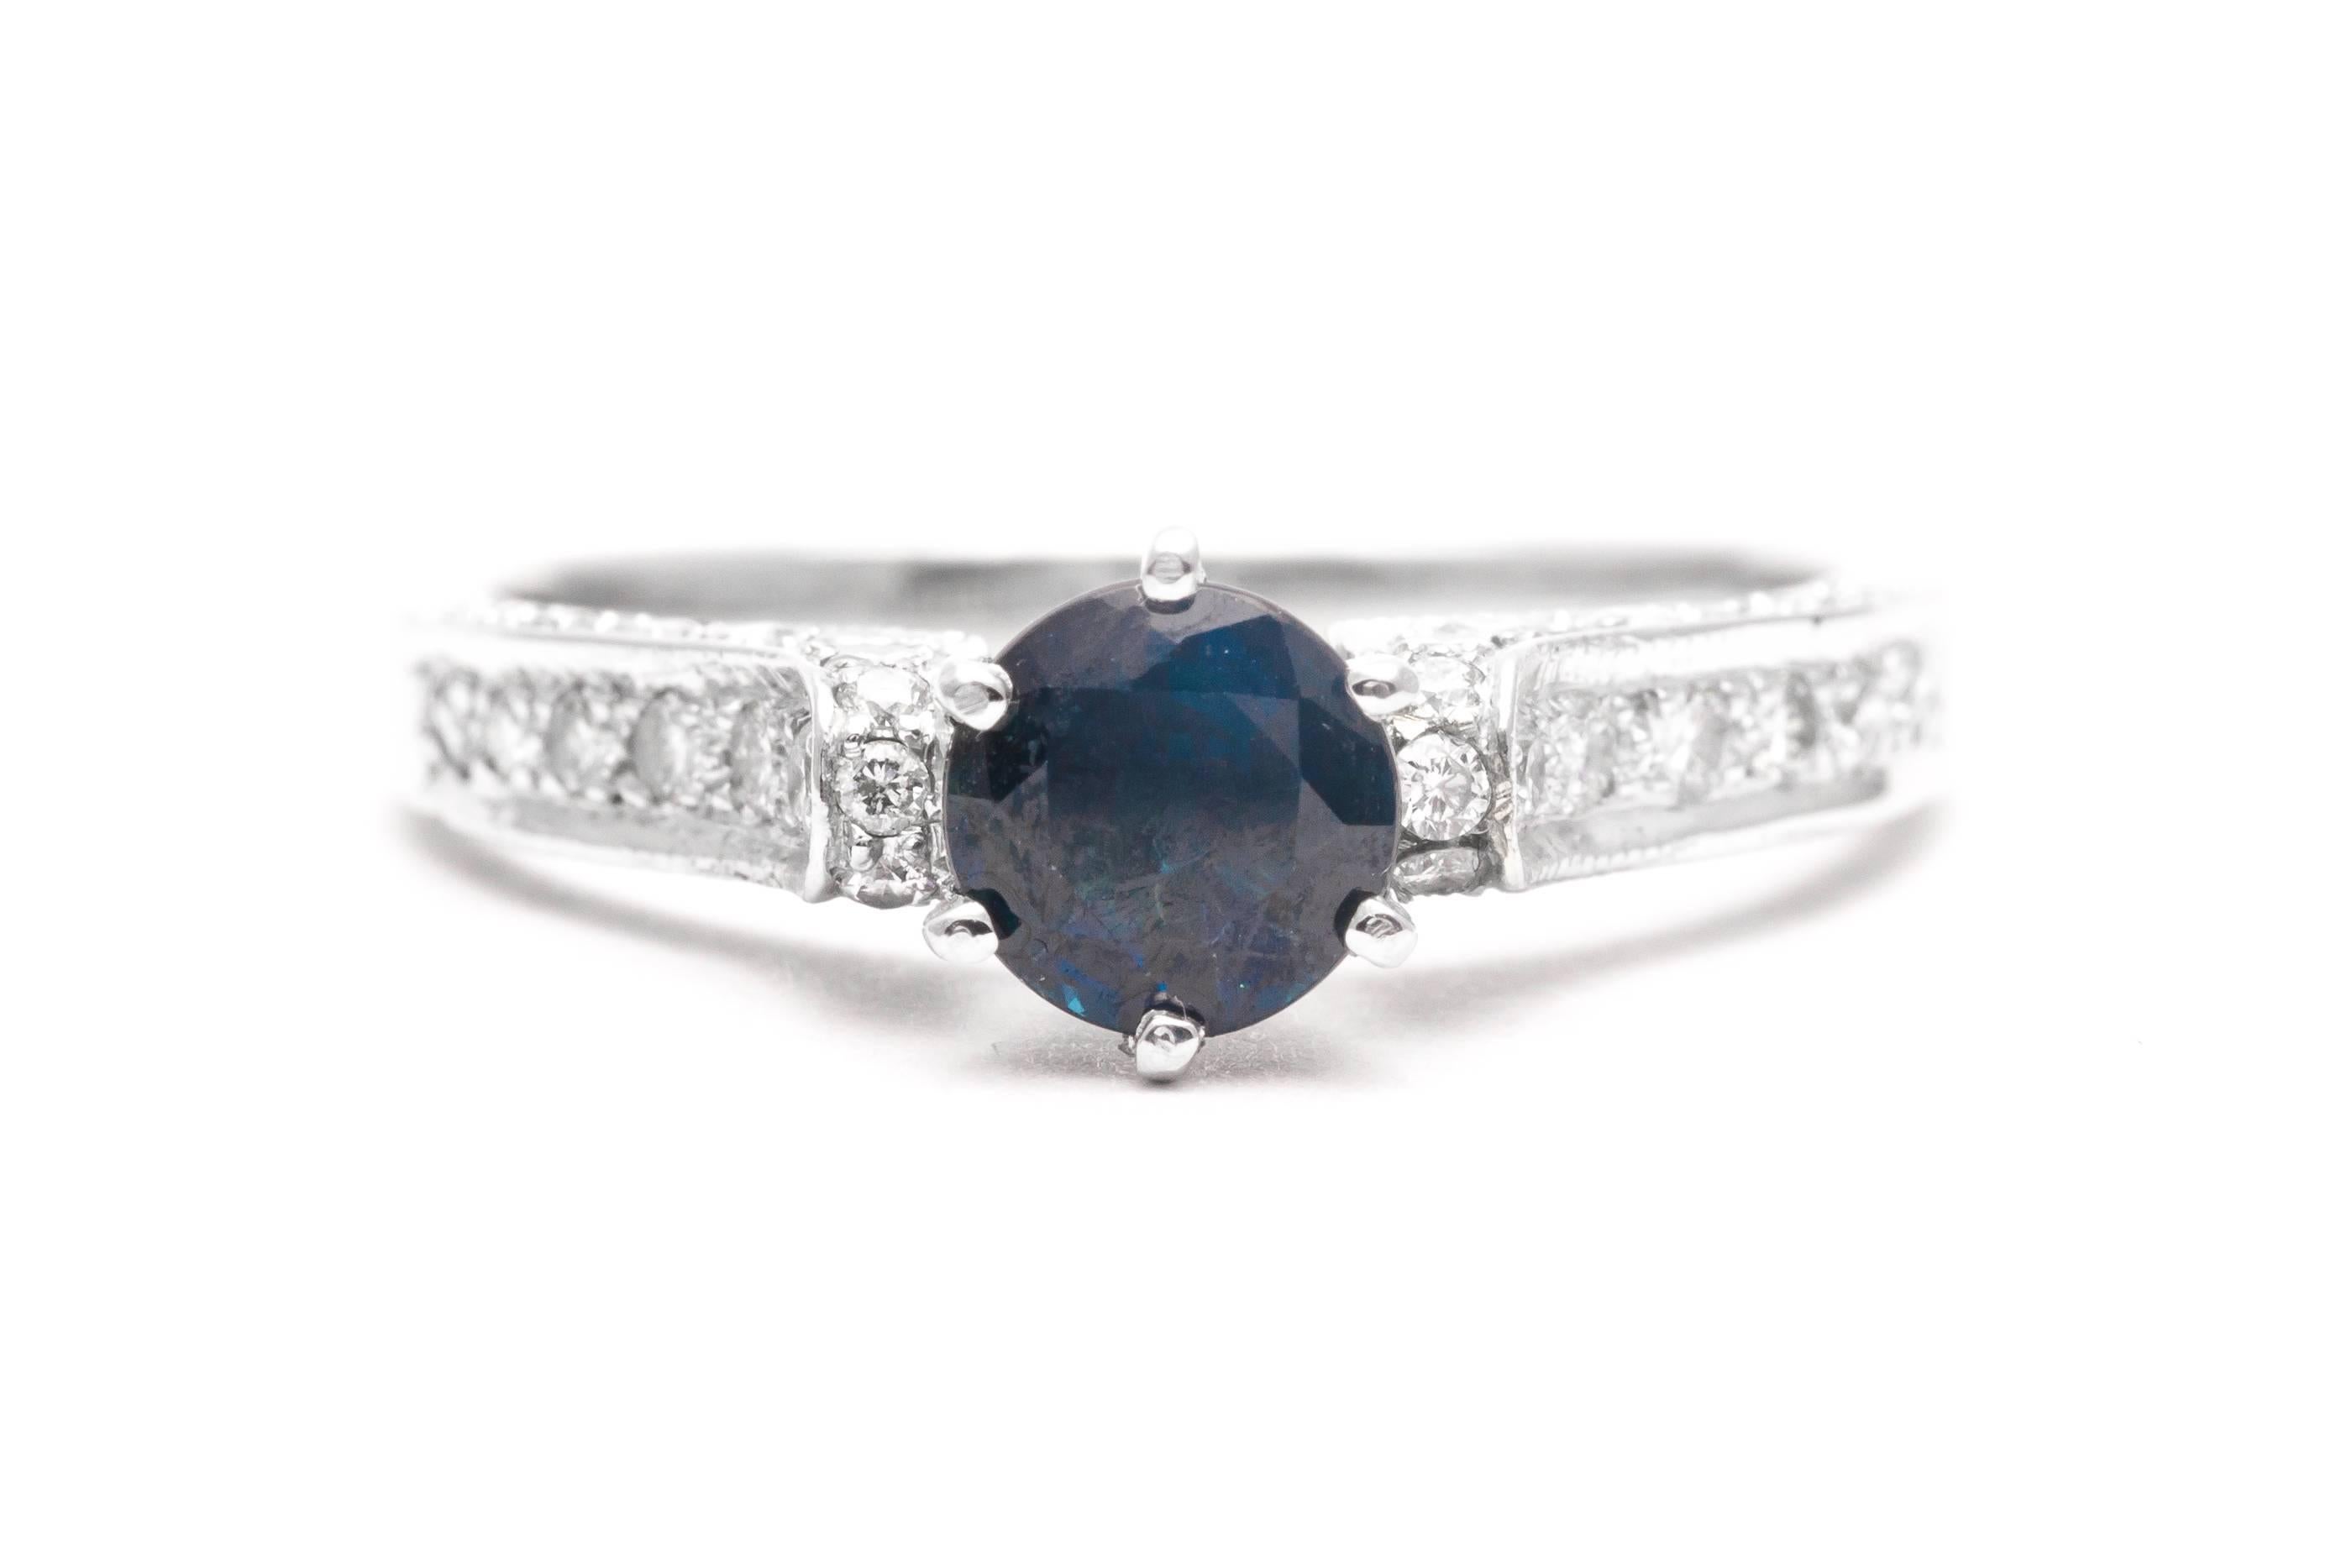 A beautiful sapphire and diamond engagement ring in 18 karat white gold.  Centered by a rich vivid blue sapphire this ring features pave set accenting diamonds throughout the luxurious 18 karat white gold mounting.

Of beautiful VS clarity and rich